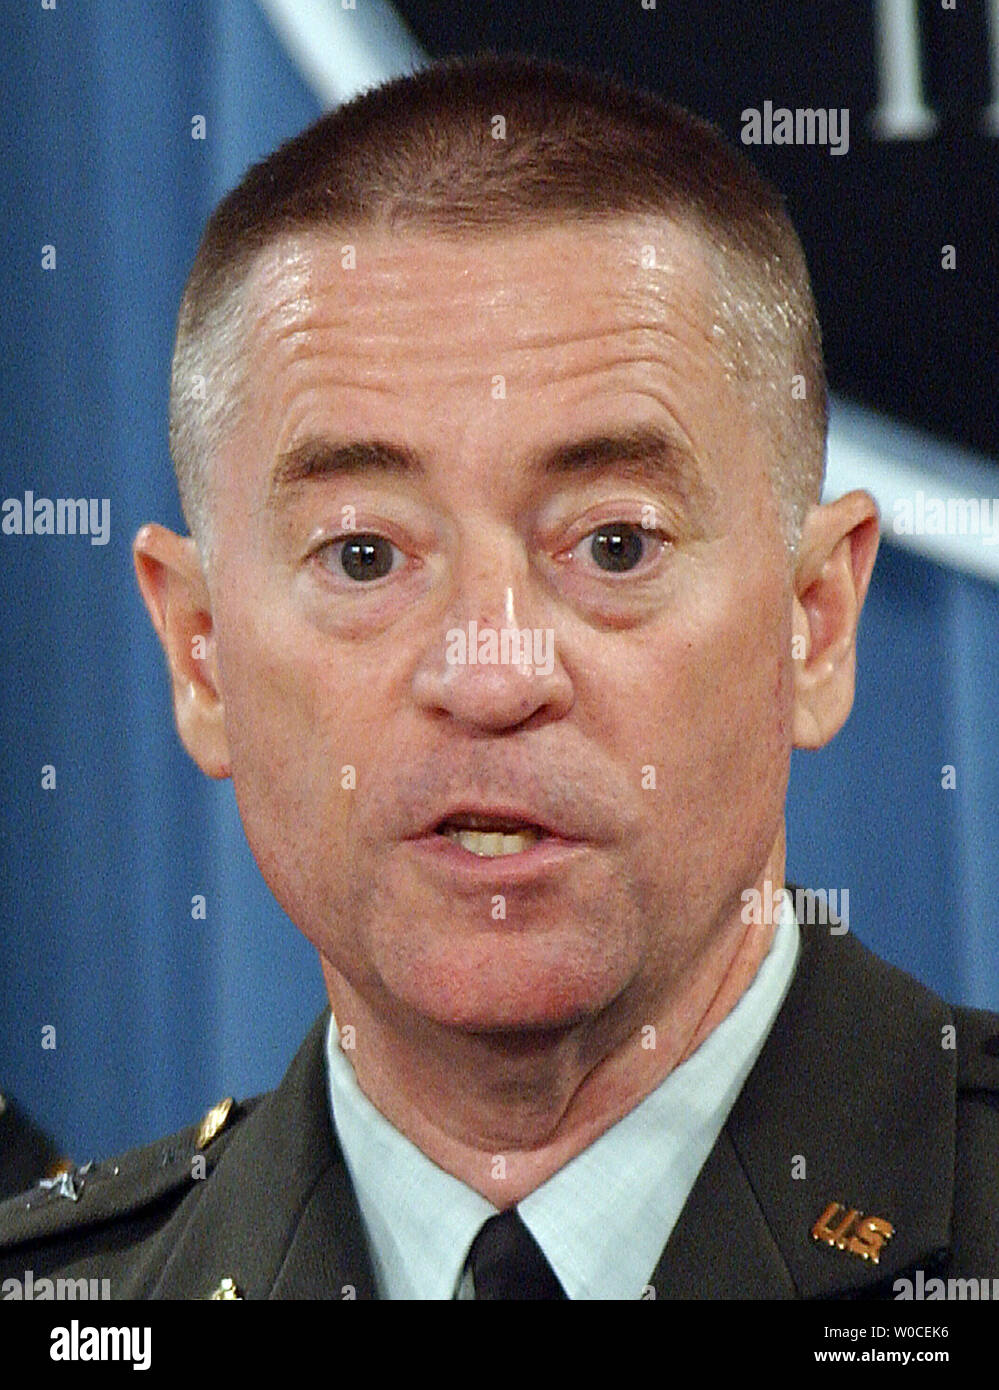 Maj. Gen. George Fay answers questions from reporters about abuse at the Abu Ghraib prison in Iraq during a news conference at the Pentagon on Aug. 25, 2004, in Arlington, Va. The Defense Department investigation found that less than 50 individuals were to blame for the abuses, but that officers above them in the chain of command made errors that led to the conditions that resulted in the abuses.  (UPI Photo/Roger L. Wollenberg) Stock Photo